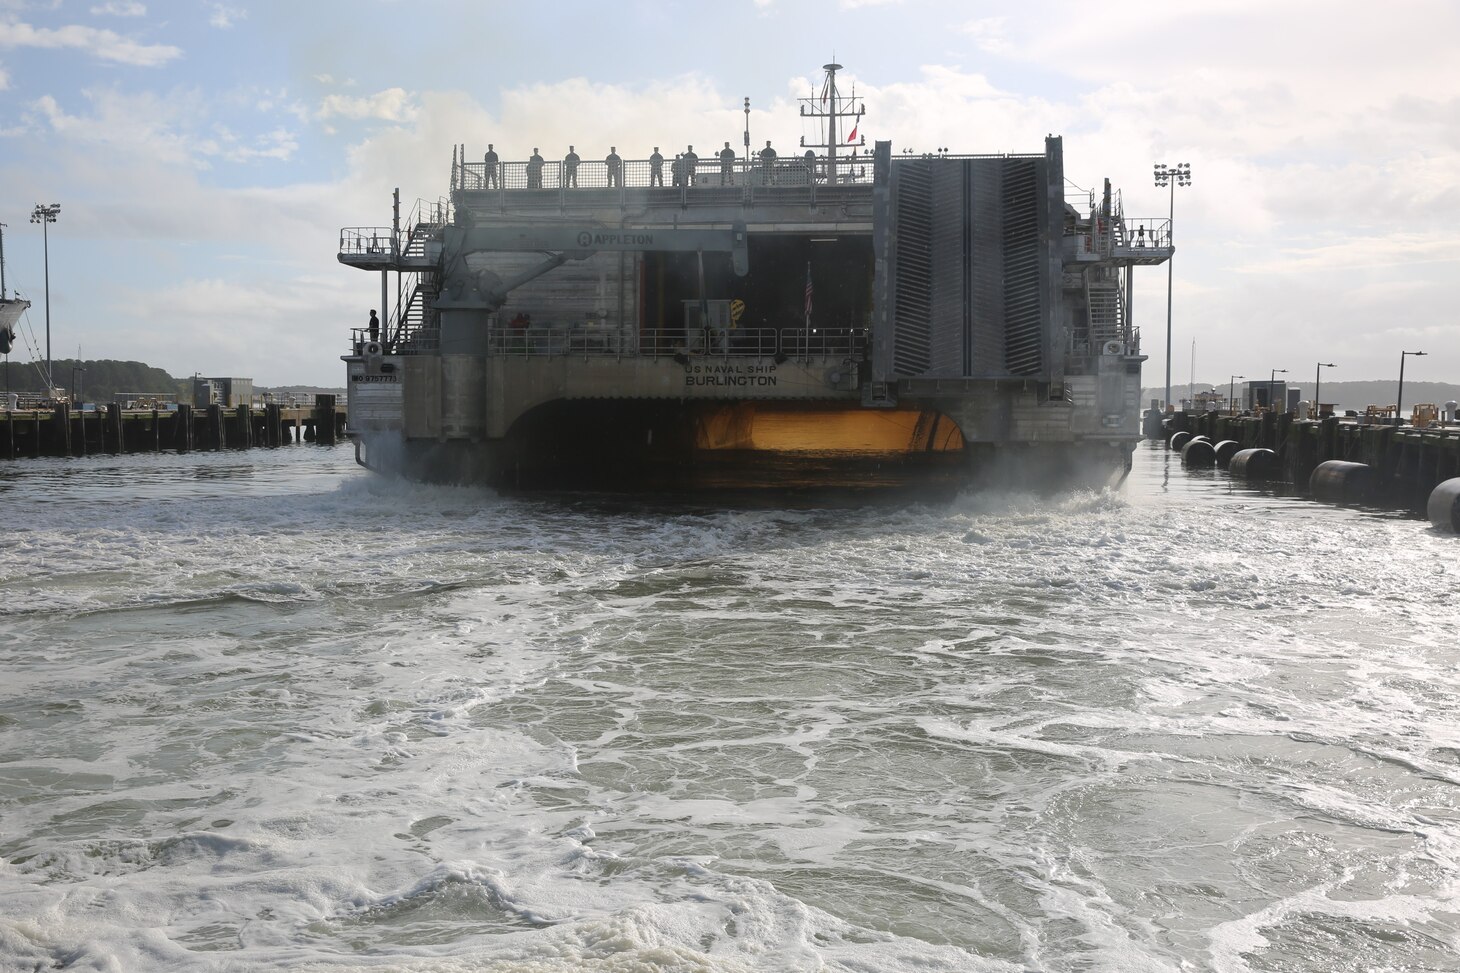 USNS Burlington (T-EPF-10) departed its hub port in Joint Expeditionary Base Little Creek